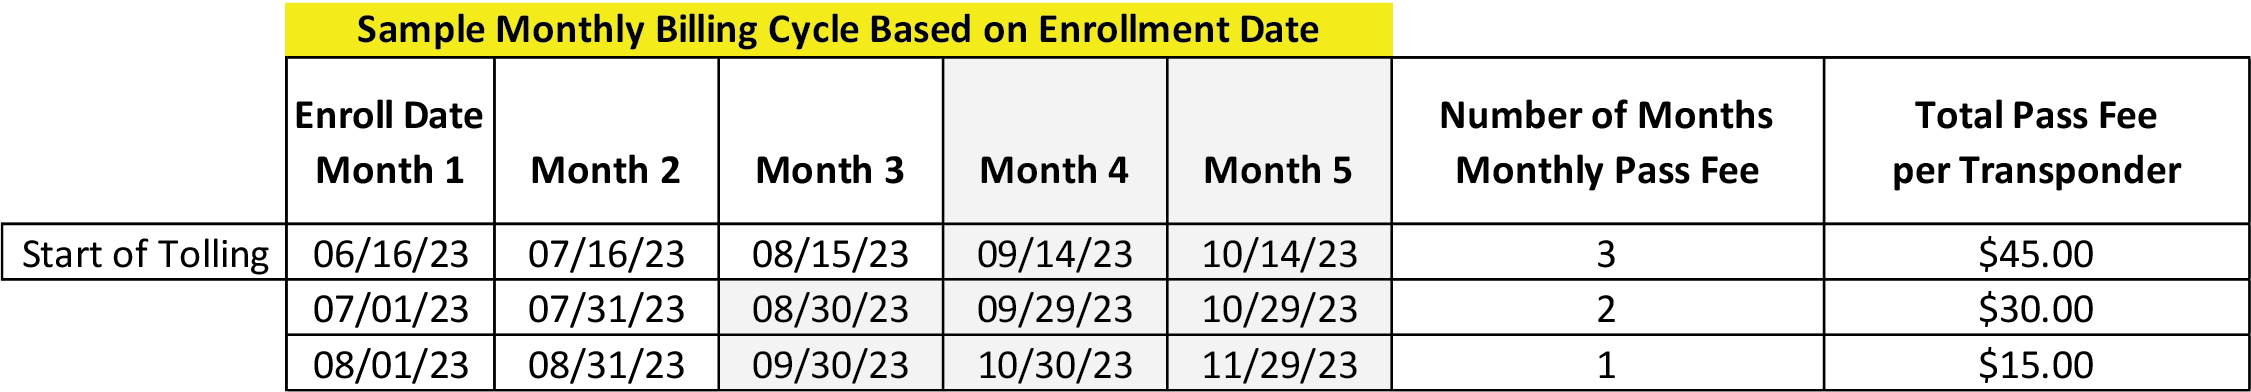 Sample Monthly Billing Cycle Based on Enrollment Date